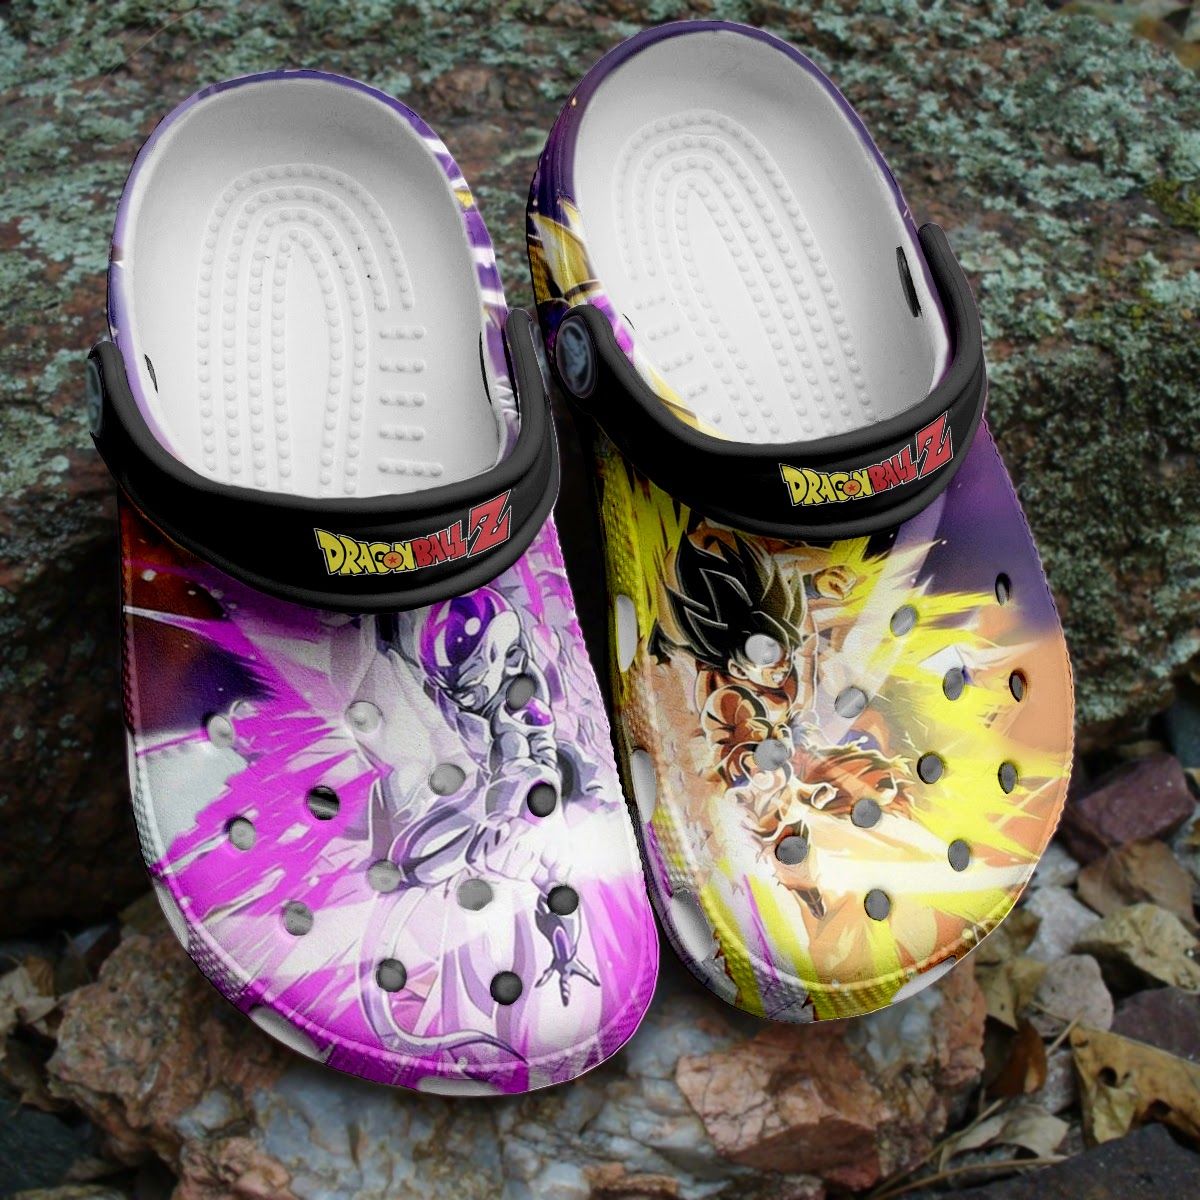 If you'd like to purchase a pair of Crocband Clogs, be sure to check out the official website. 166